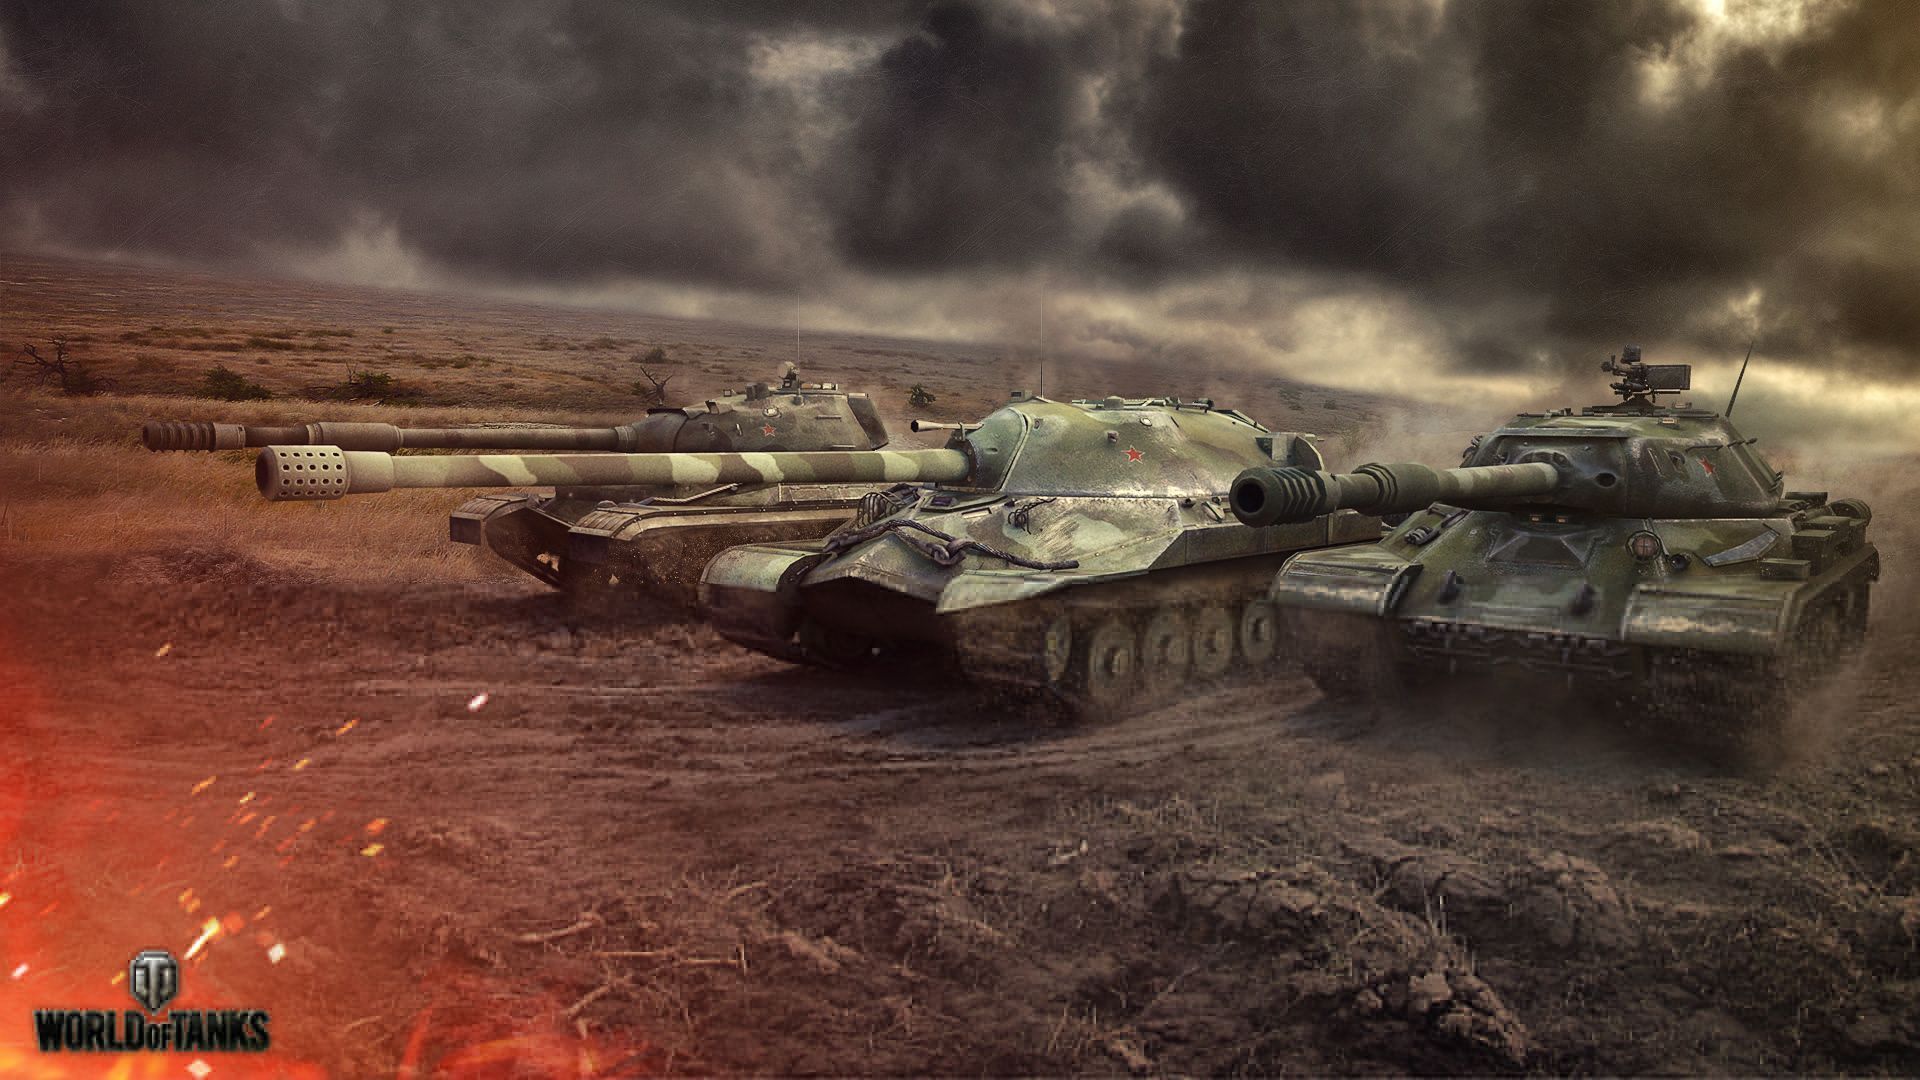 World of Tanks Tanks IS 7 IS 4 IS 8 military wallpaper 1920x1080